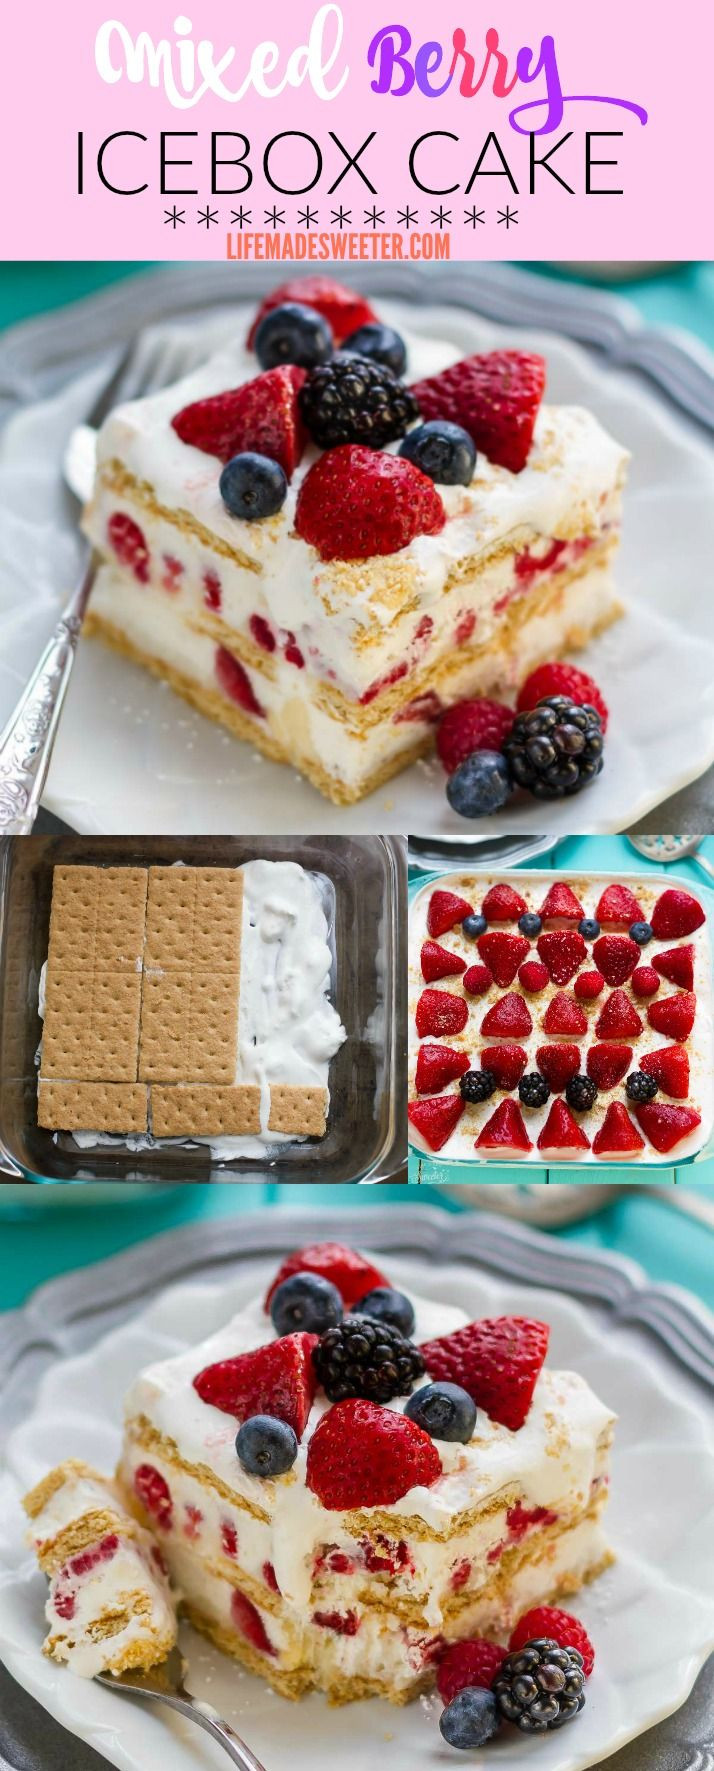 Easy Summer Desserts
 Top 25 ideas about Icebox Cake Recipes on Pinterest